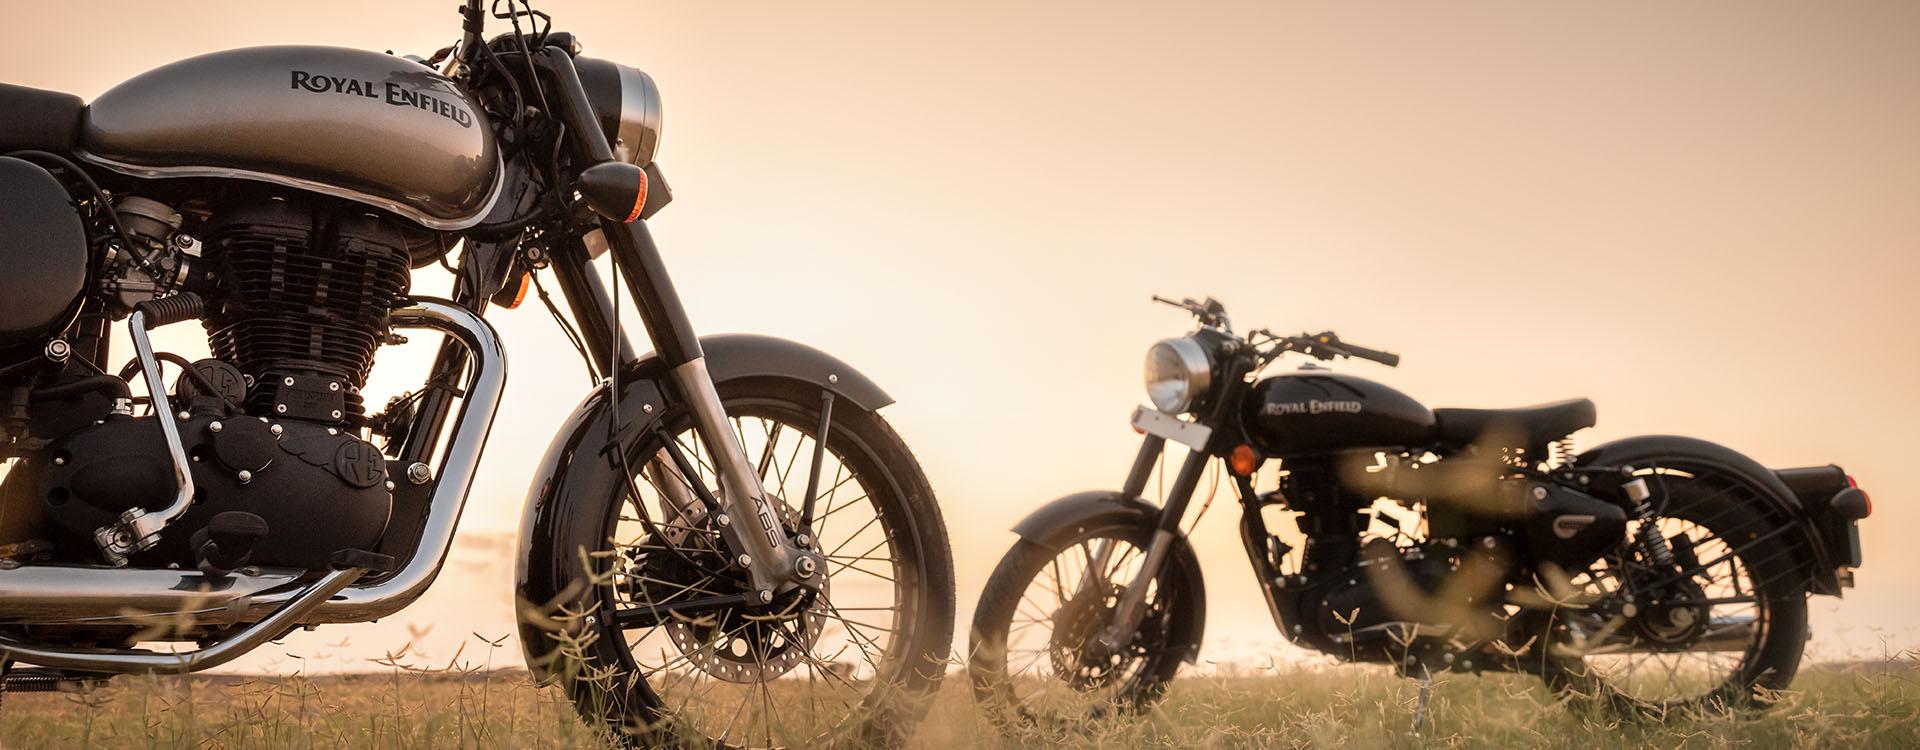 Classic 350, Specifications, Reviews, Gallery. Royal Enfield